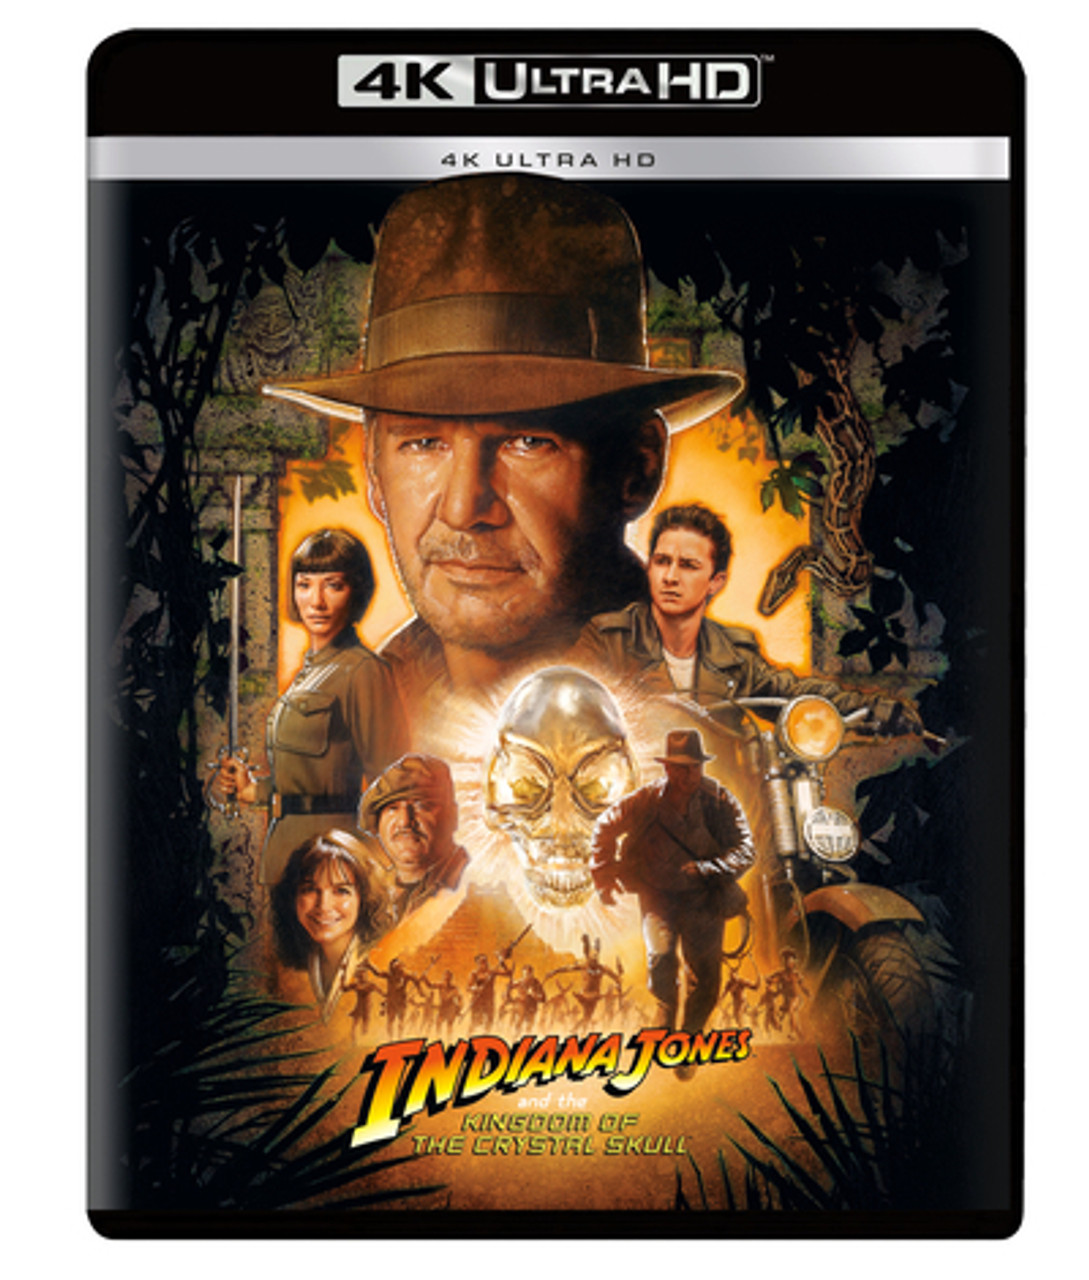 Indiana Jones and the Kingdom of the Crystal Skull (2008) [Blu-ray / 4K  Ultra HD + Blu-ray (Steelbook)] - Planet of Entertainment